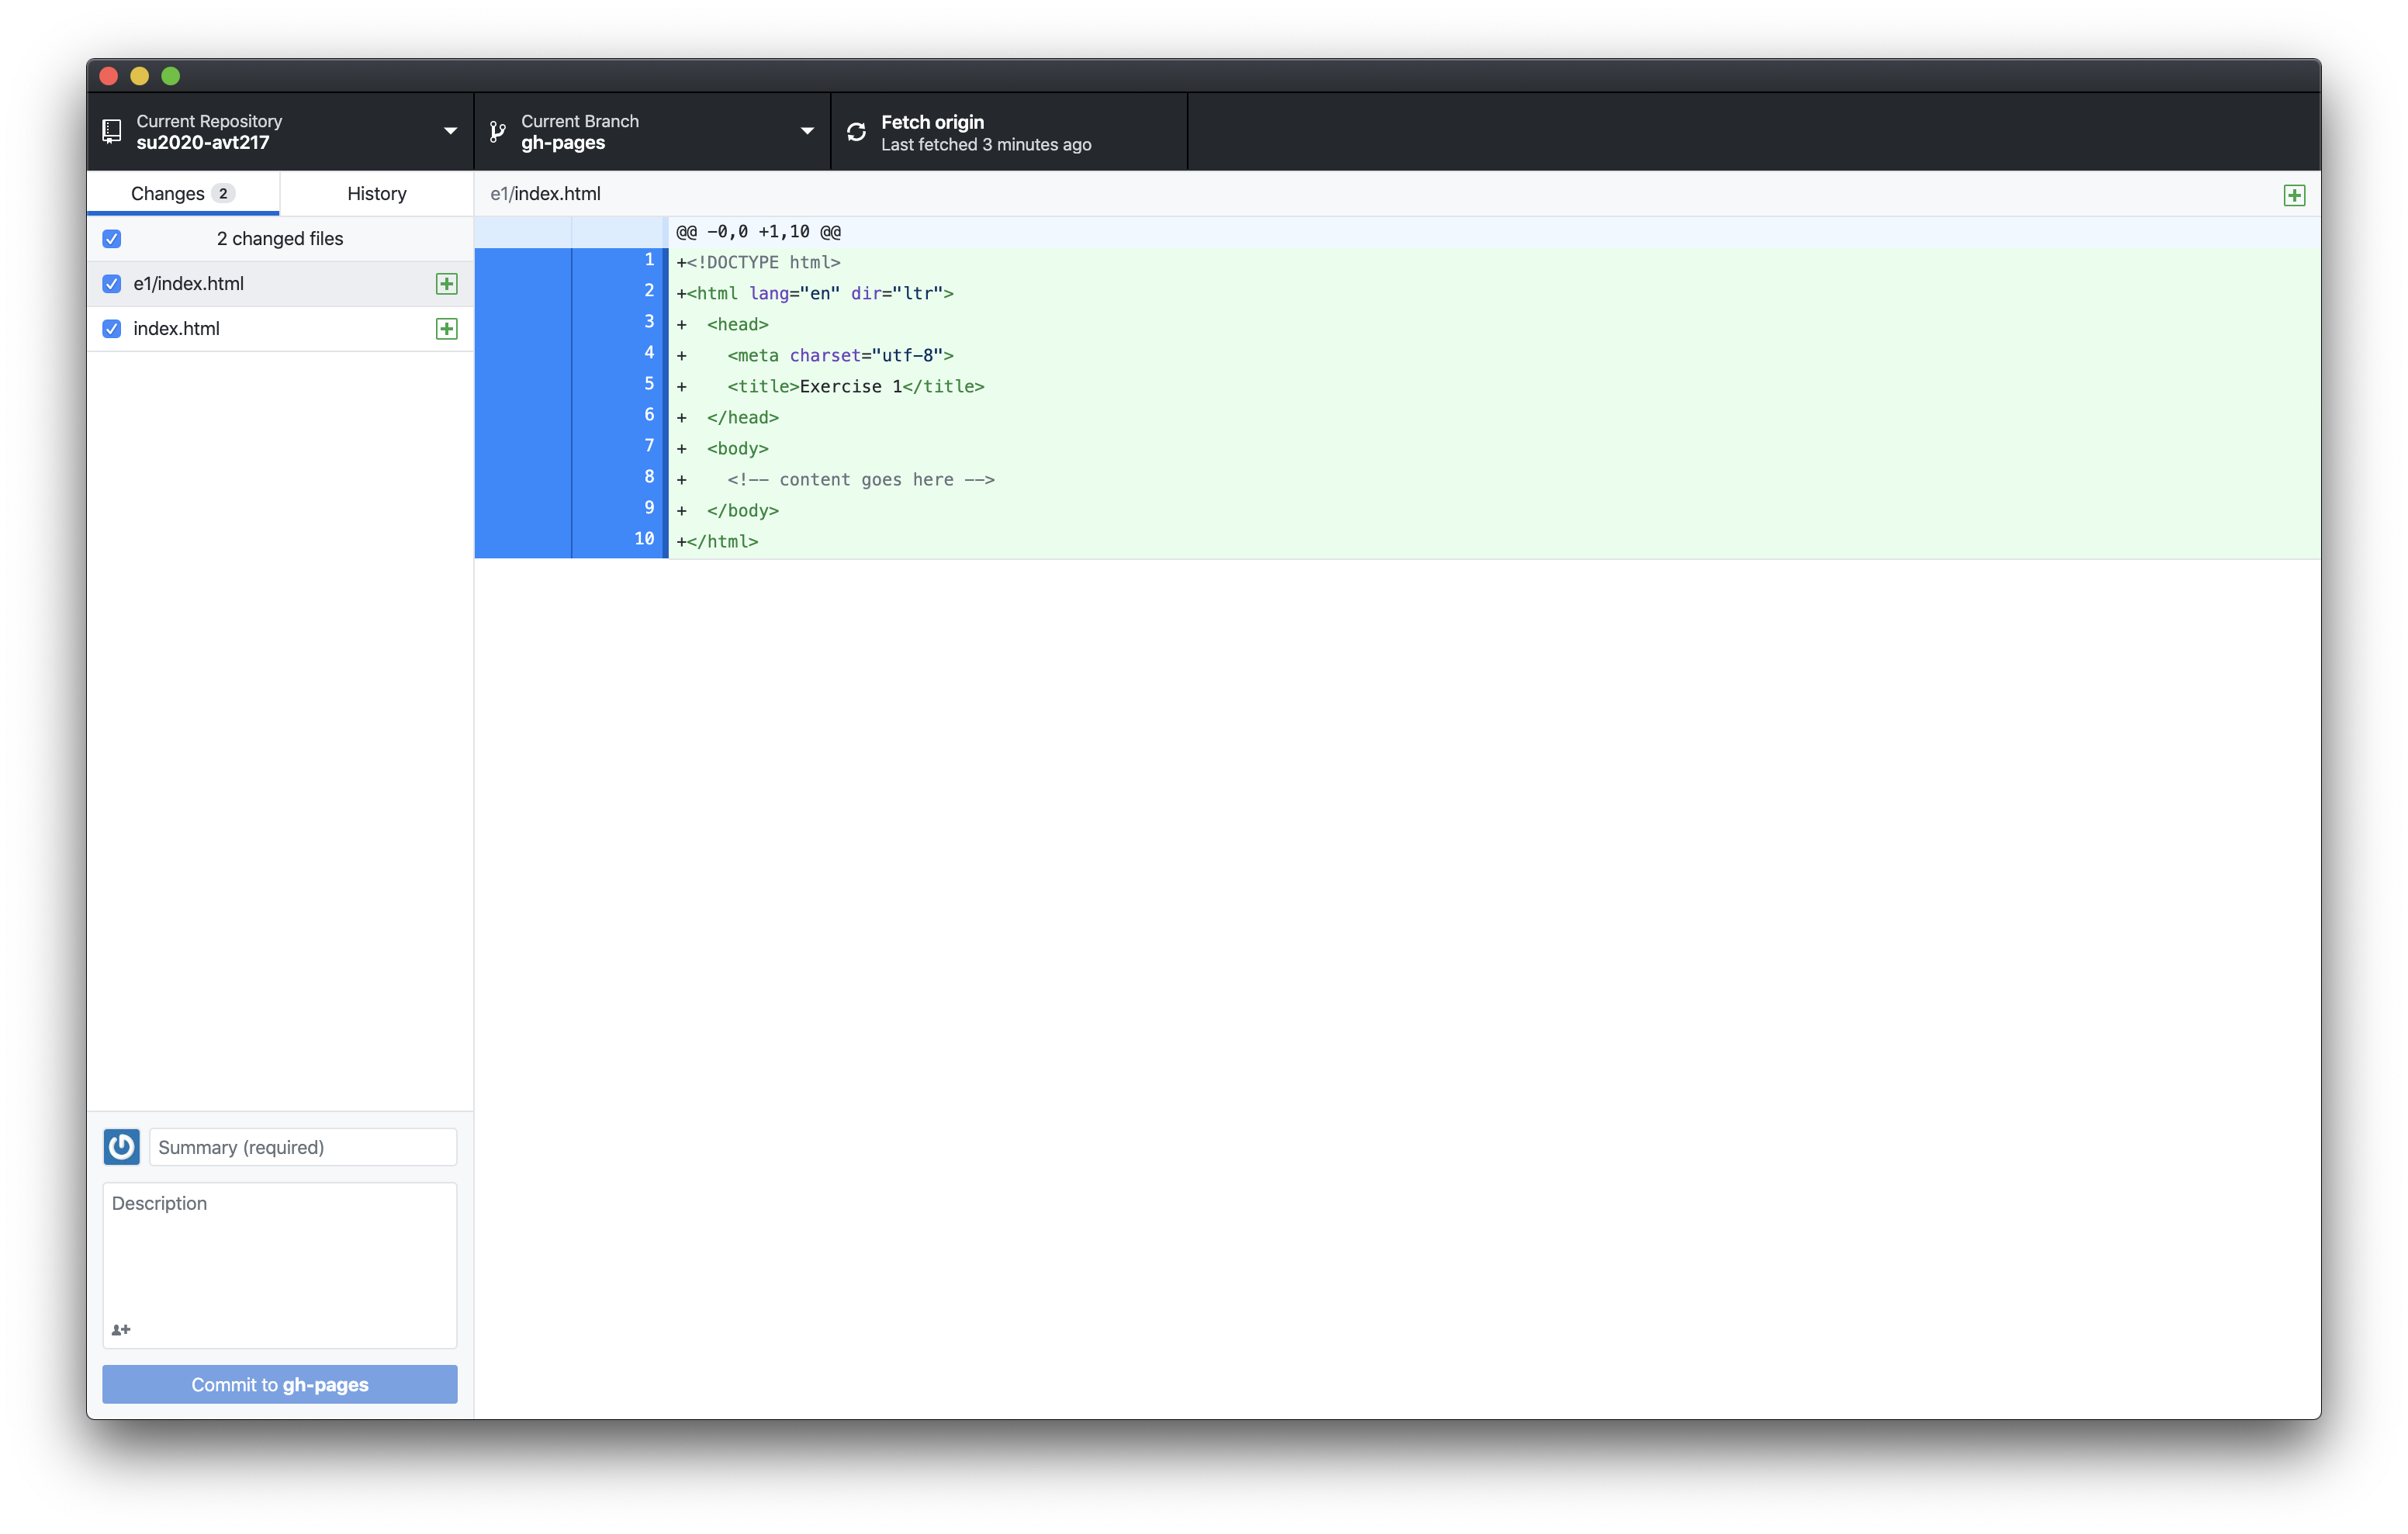 image of Github Desktop showing changes to repository